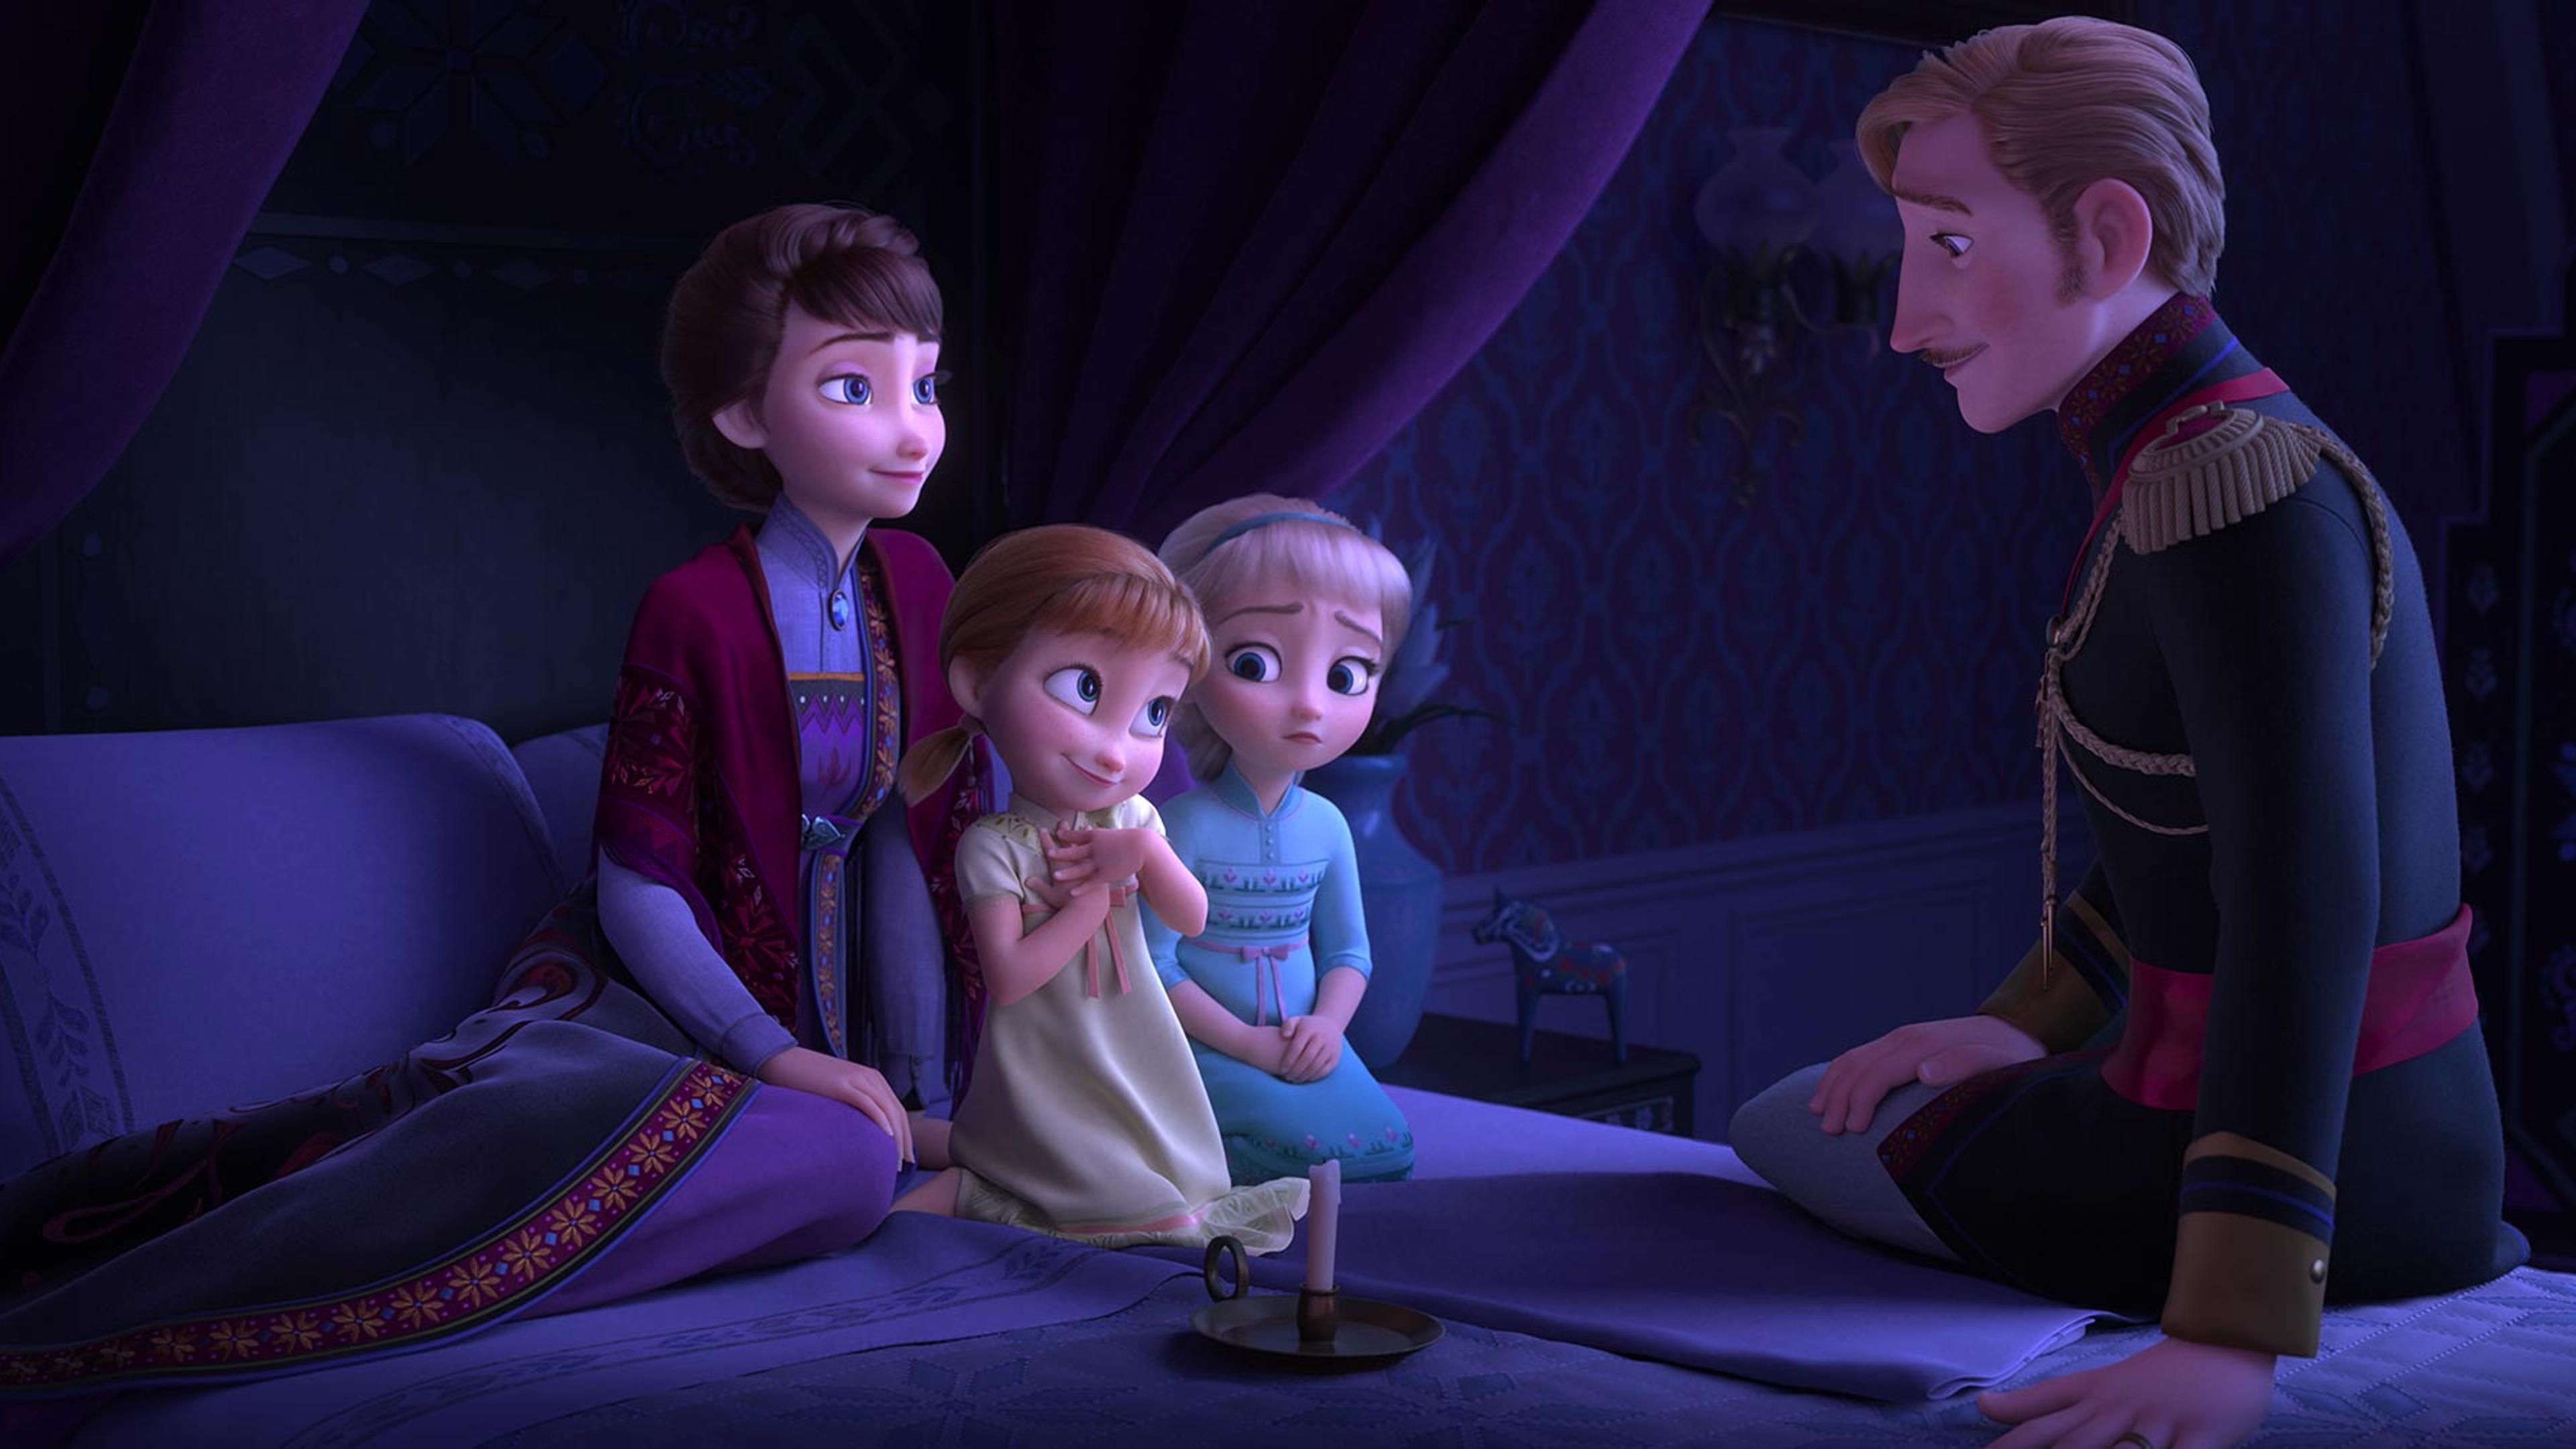 Download Frozen 2 scene - Anna and Elsa with parents 3840x2160.